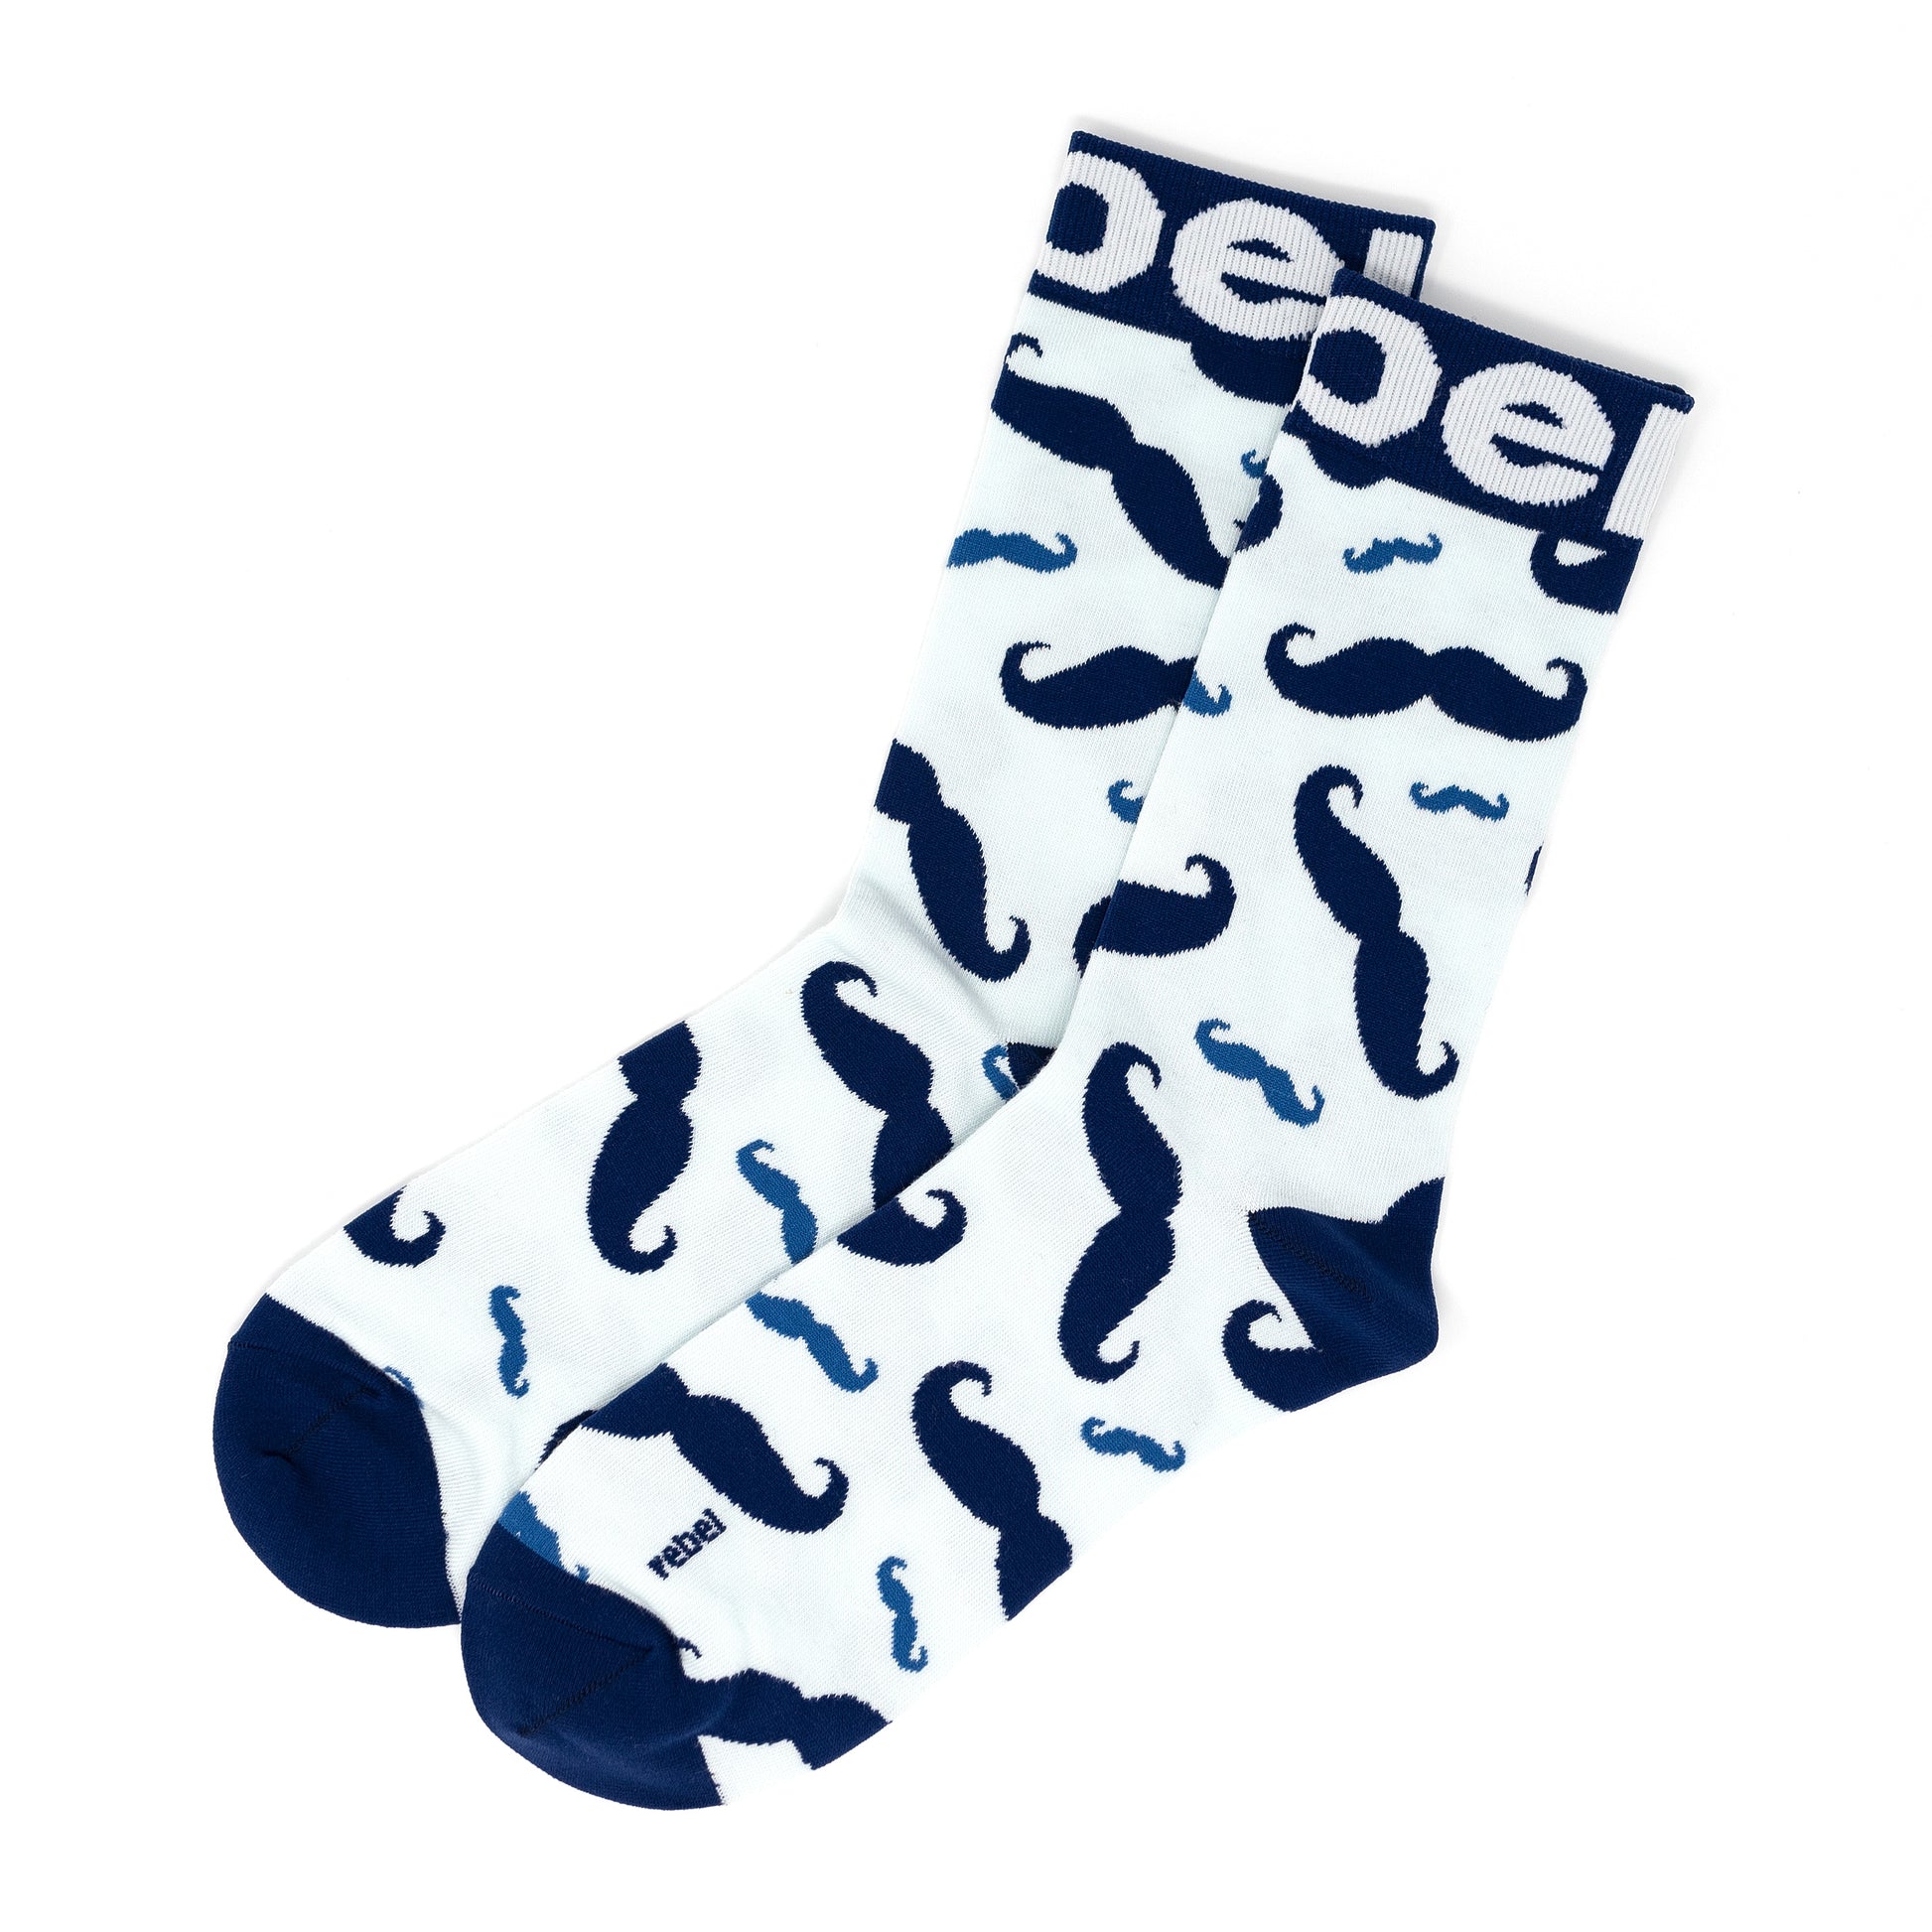 Our Funky Stache Socks are a unique addition to any wardrobe, whether you're dressing up or down.